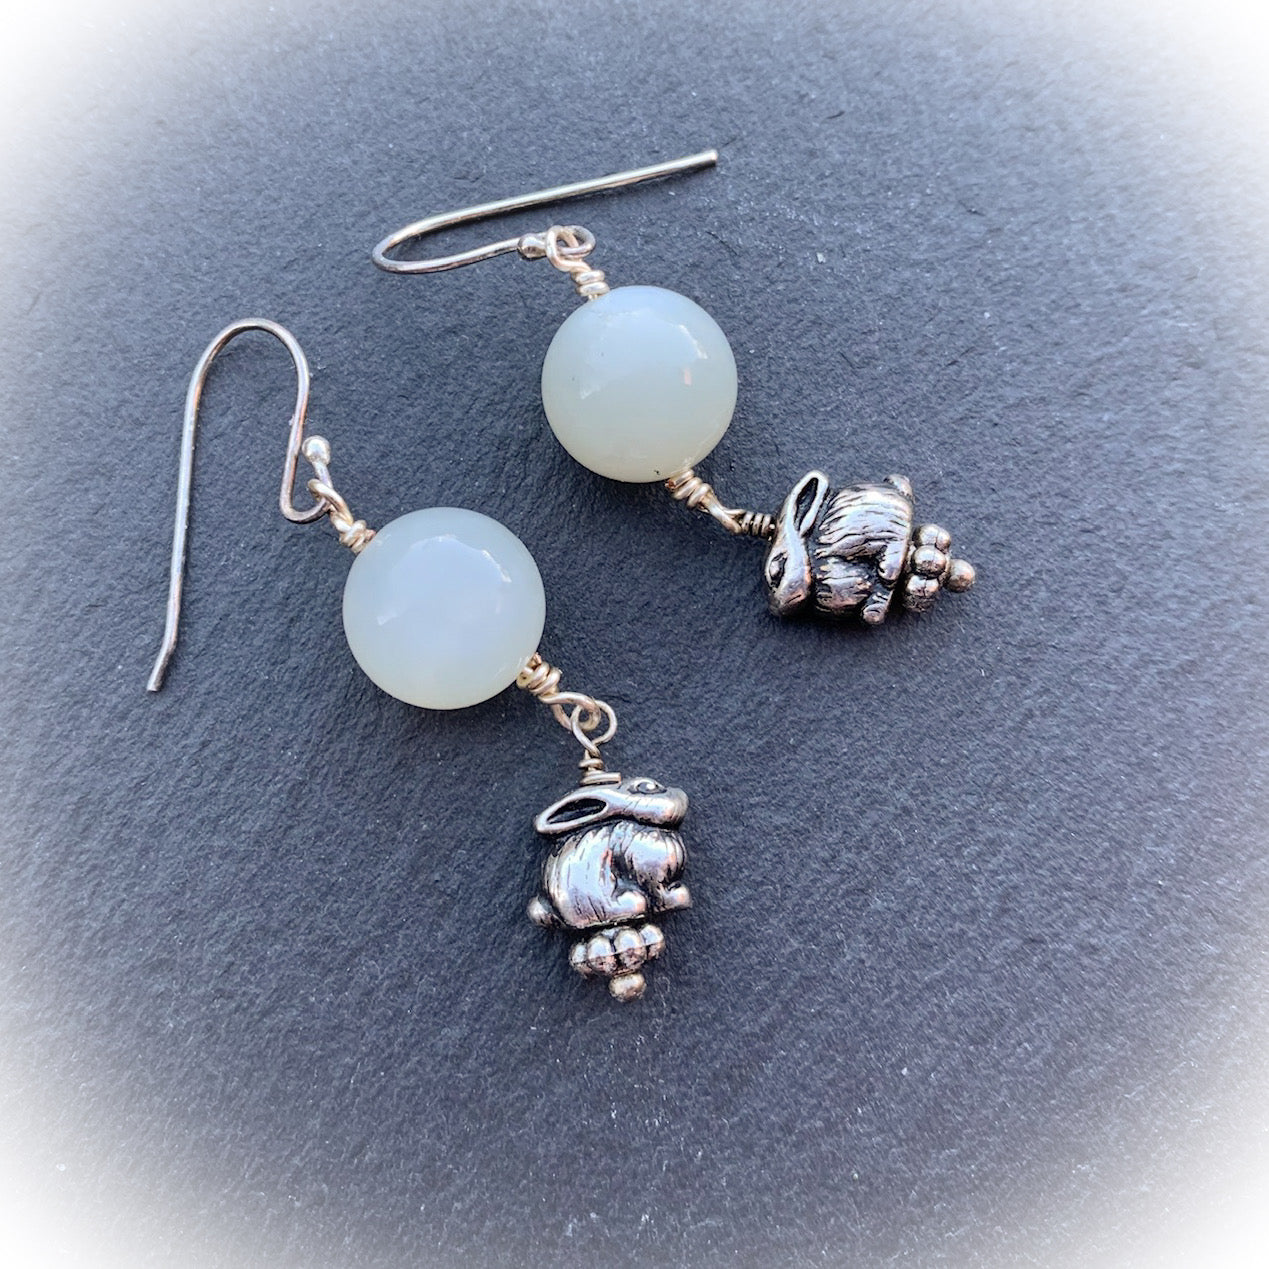 Lunar Rabbit Earrings With Grey Moonstone And Pewter Rabbits/Hares With 925 Sterling Silver Ear-wires - Darkmoon Fayre